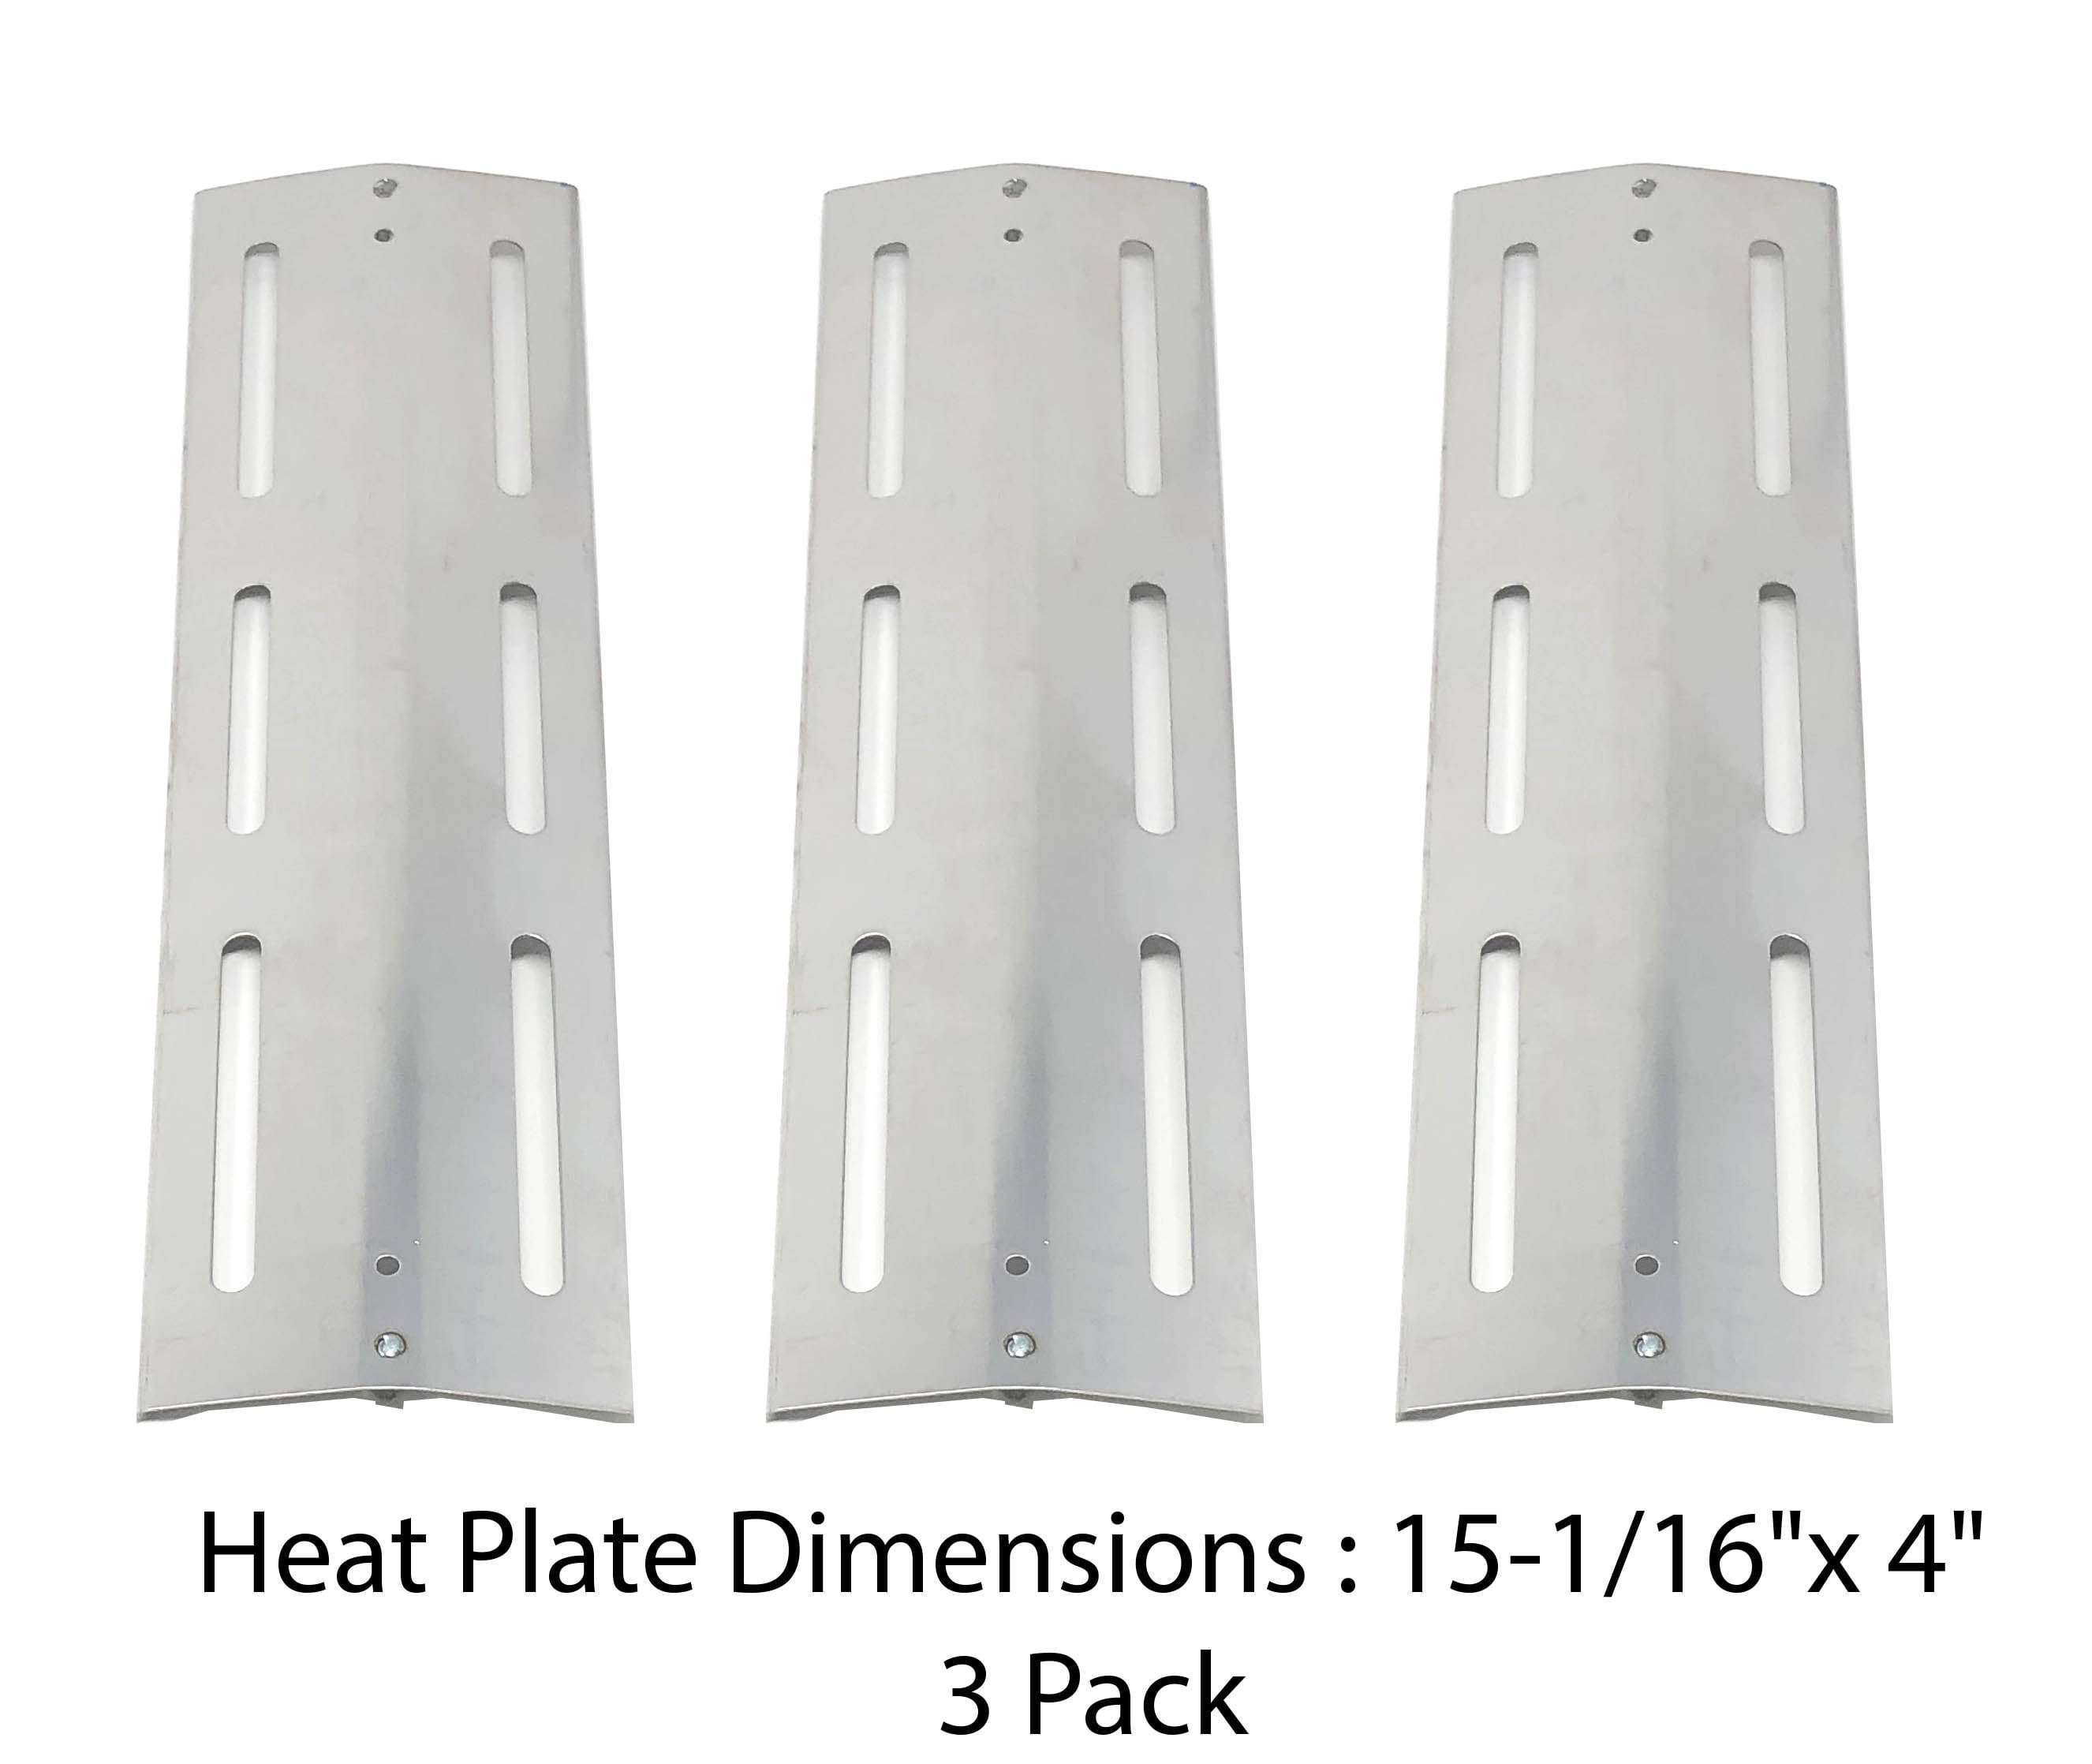 Replacement Heat Plate/Flavorizer for Kenmore 141.16315, Gas Models, 3-Pack - Walmart.com